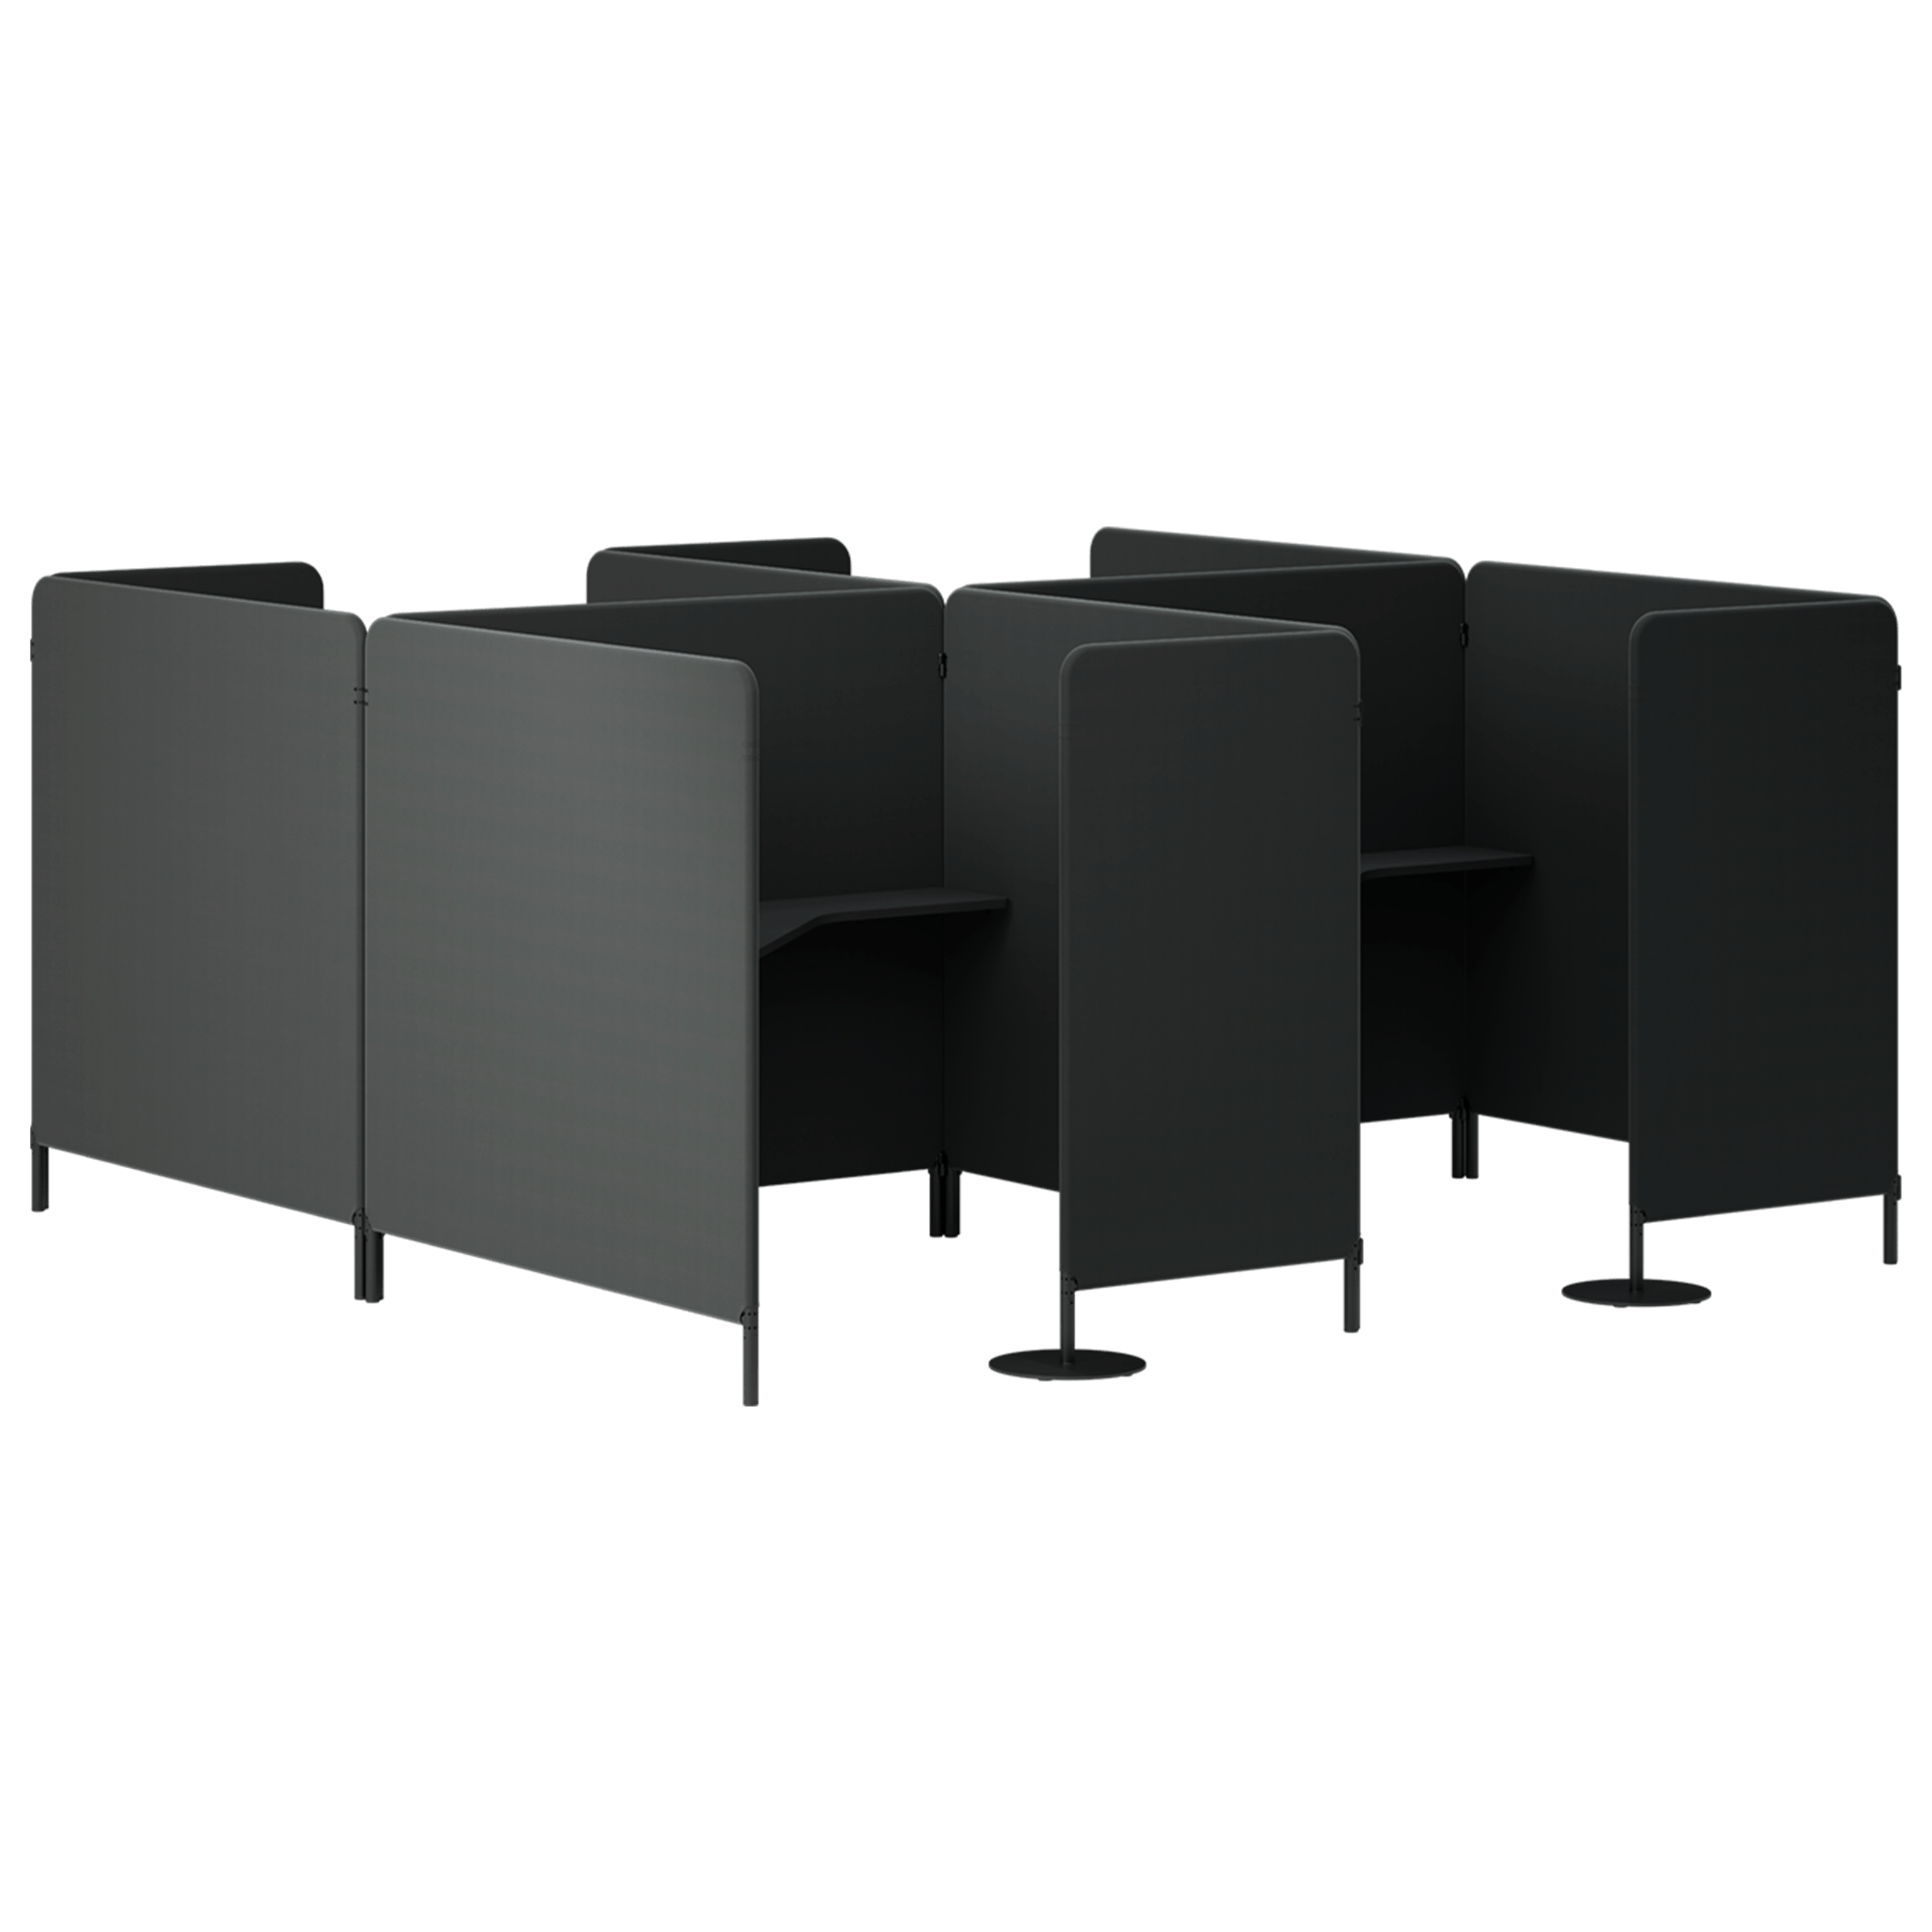 4 study booths with four side panels enclosing a desk